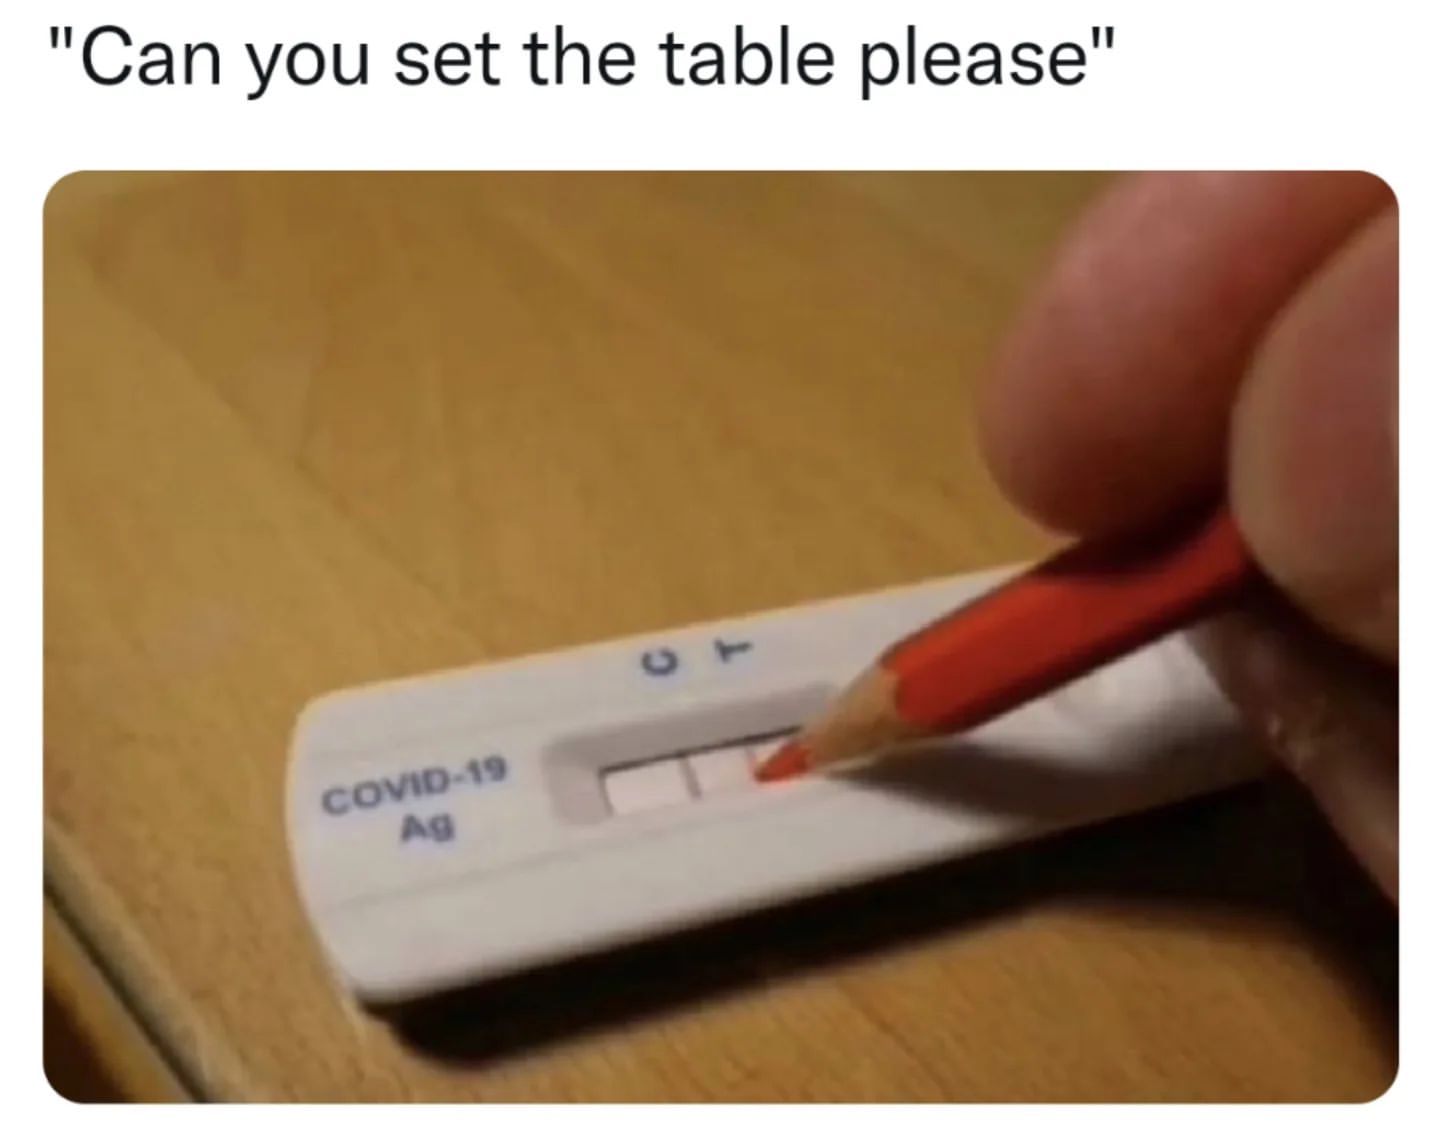 Can you set the table please.